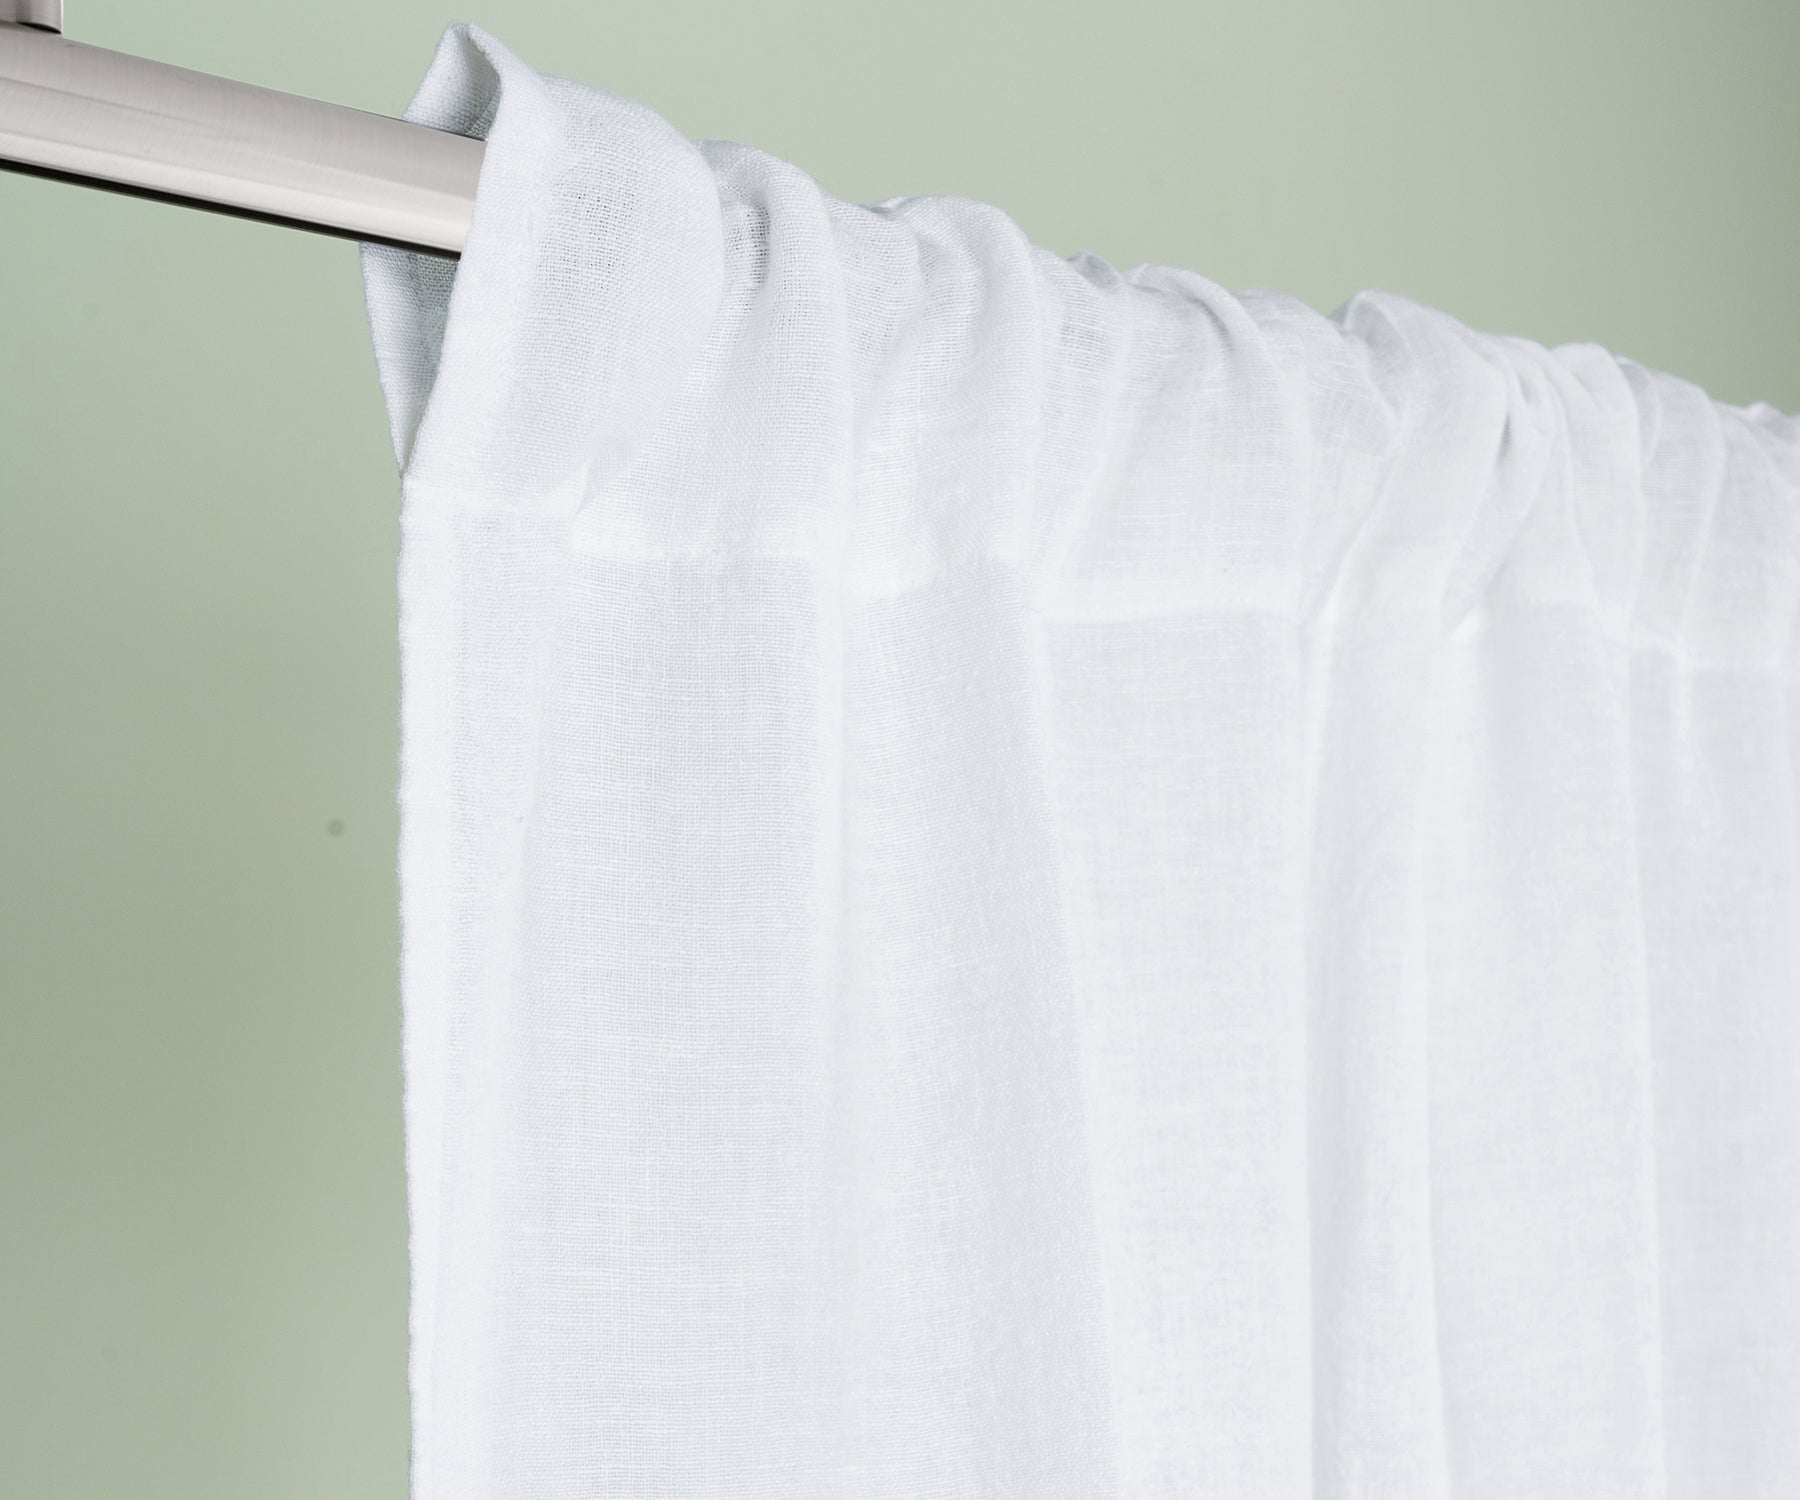 Solid Relaxed Linen Shower Curtain